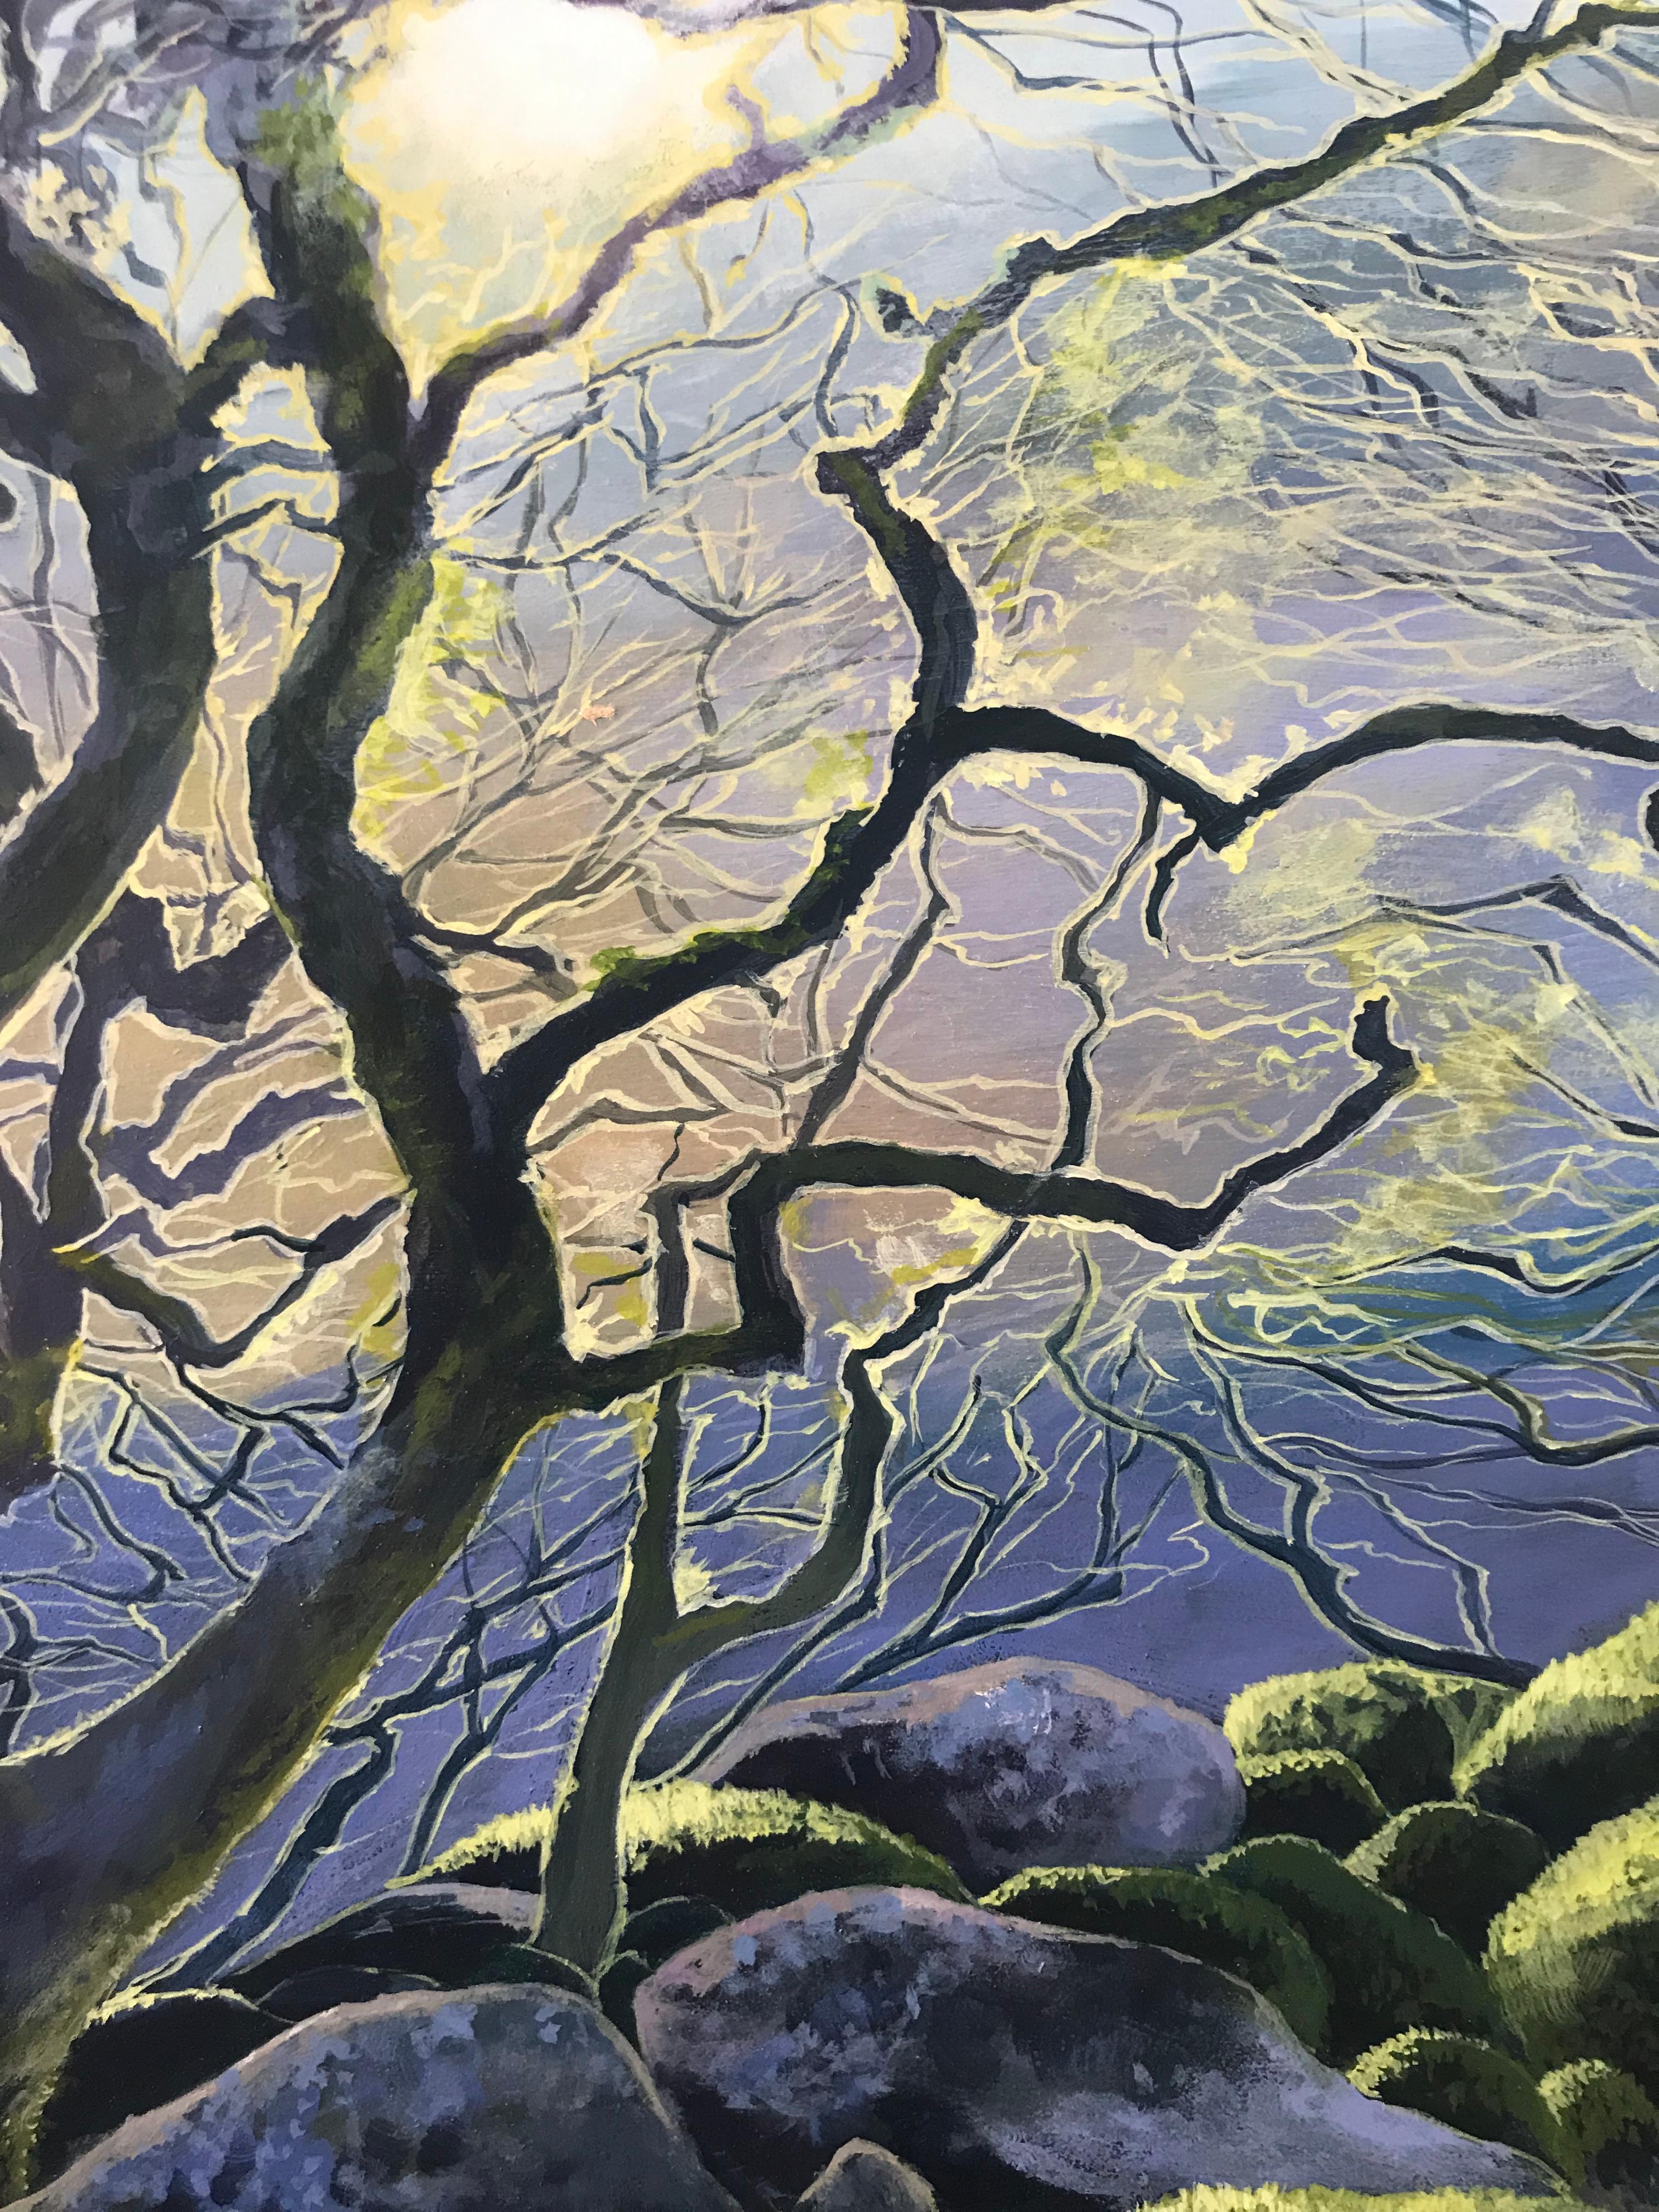 Debbie Baxter is a well know English tree artist

Acrylic on canvas
Image 90 x 70cms.